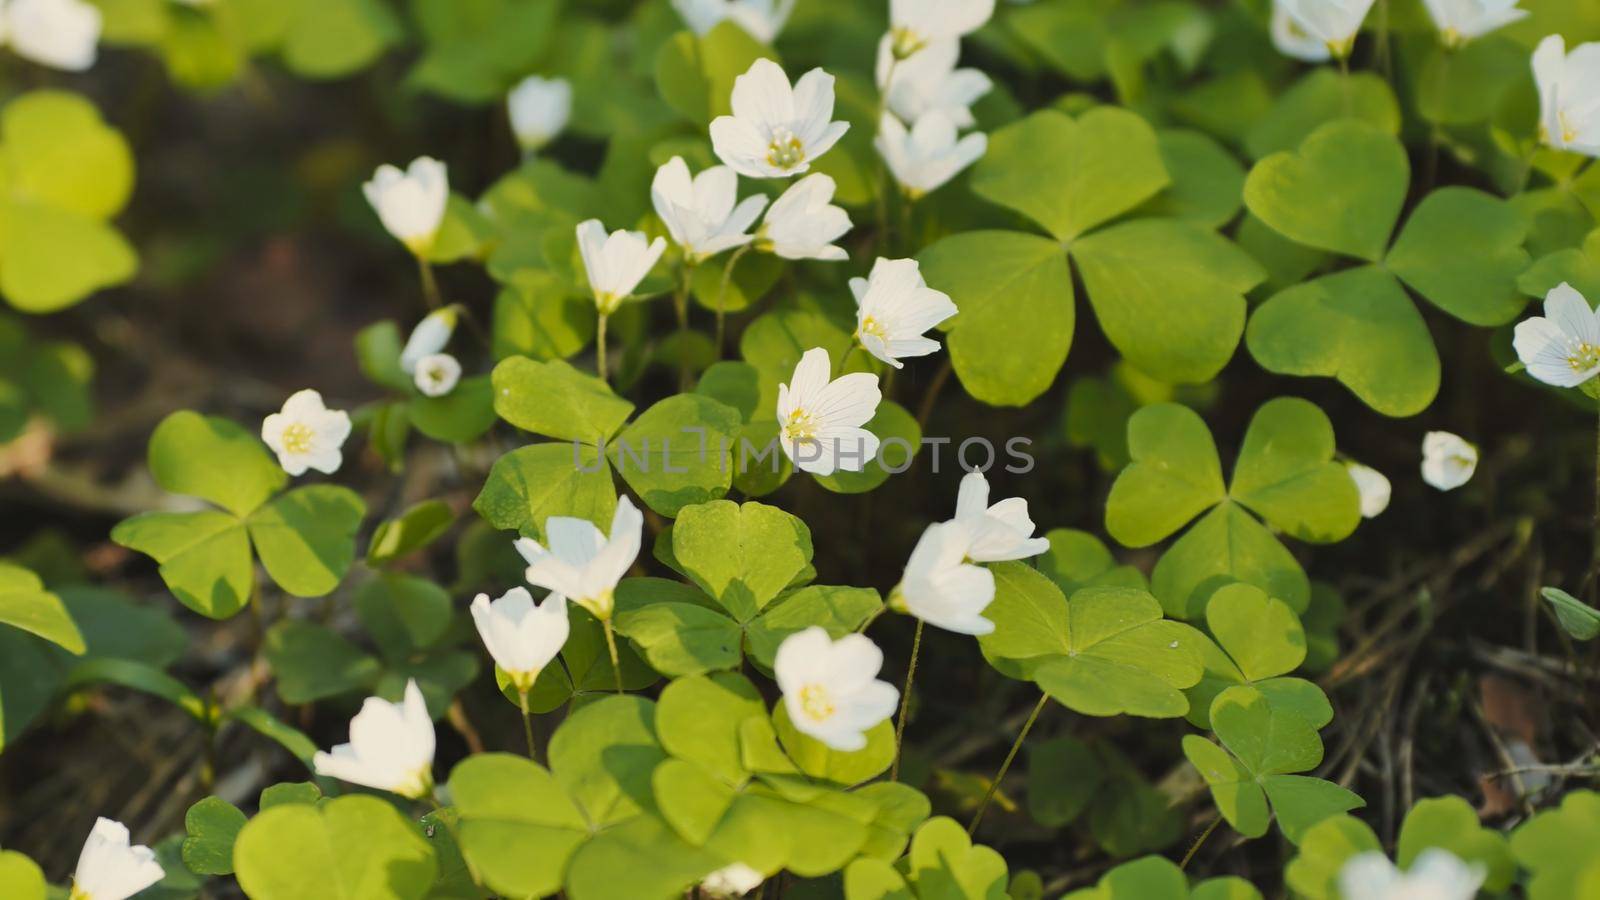 White Oxalis blooms in the forest in spring